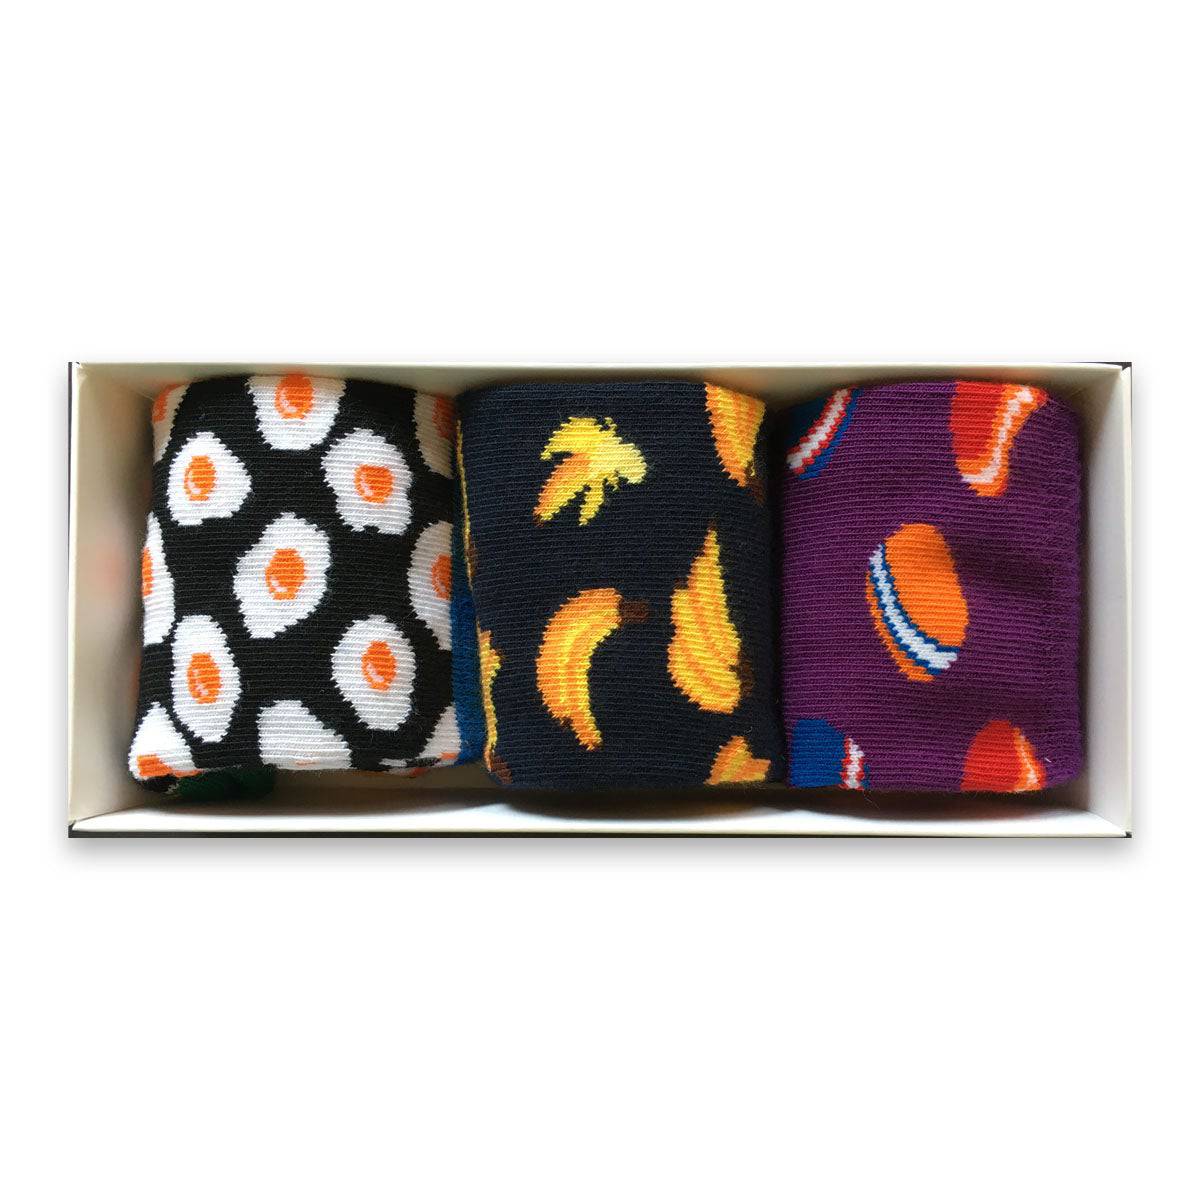 Toddler Combed Cotton Crew Assorted 3-Pack Gift Box